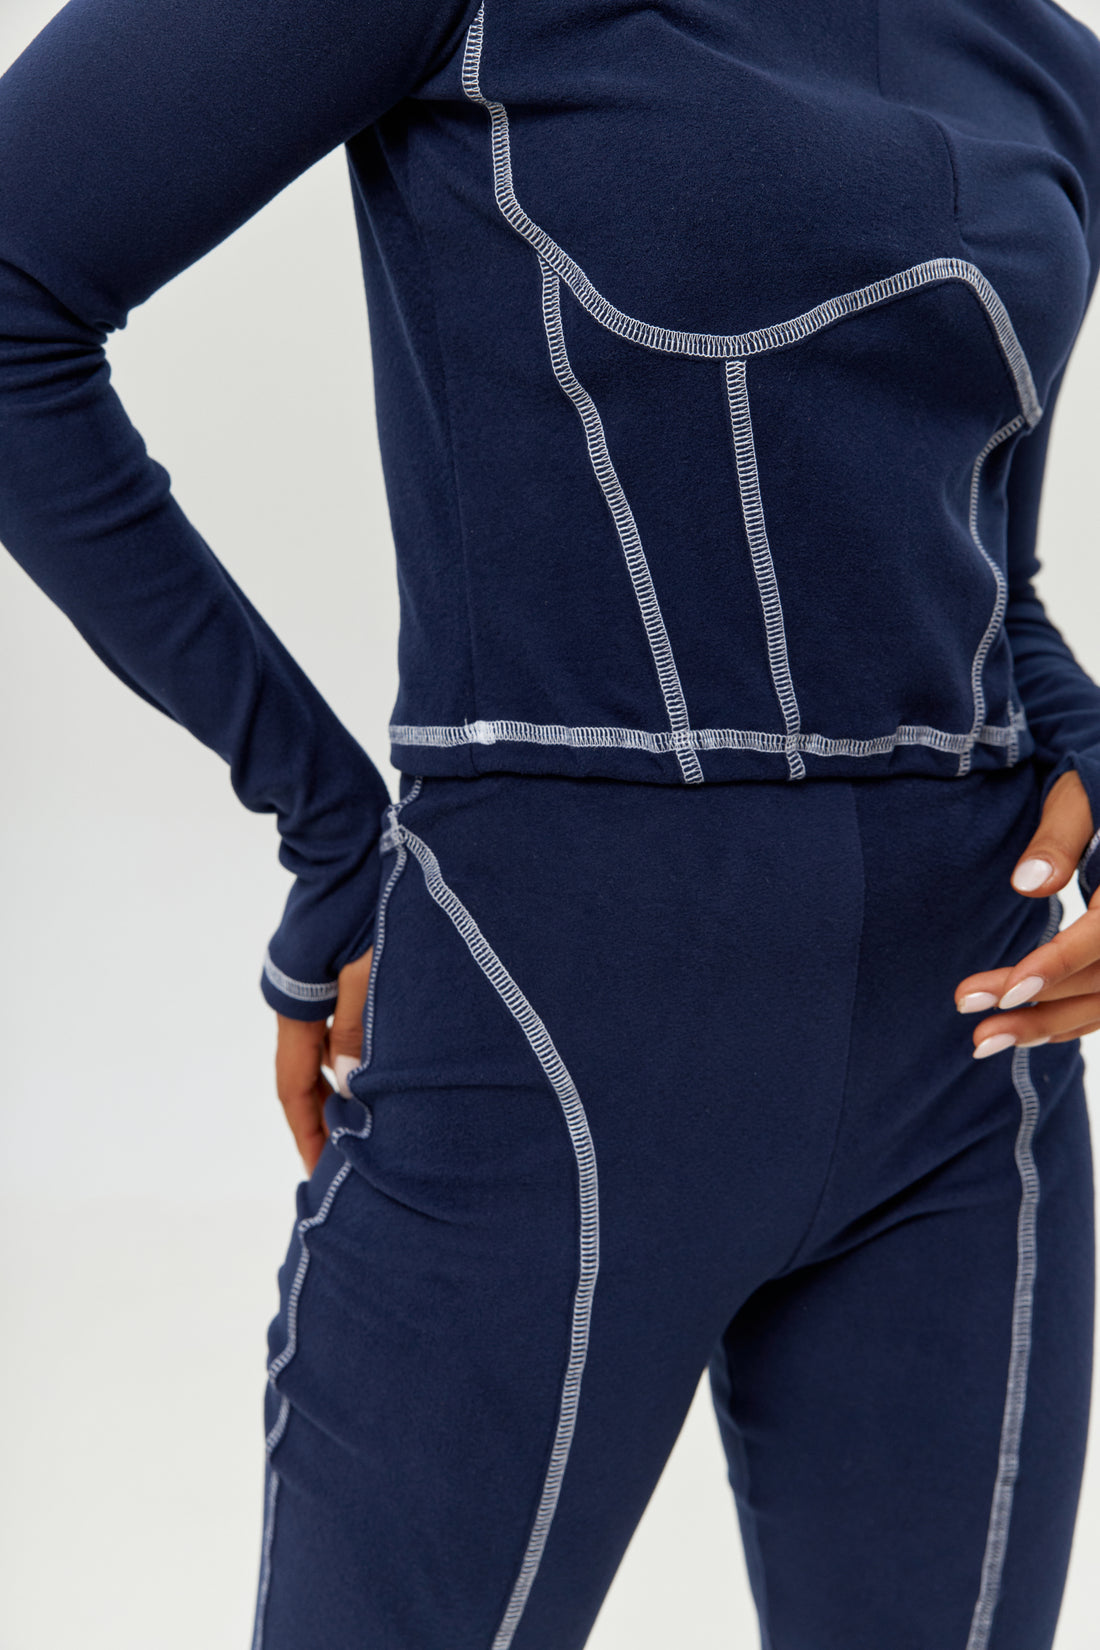 Base layer black jumpsuit - Thermal underwear navy blue one piece - Long  johns for women